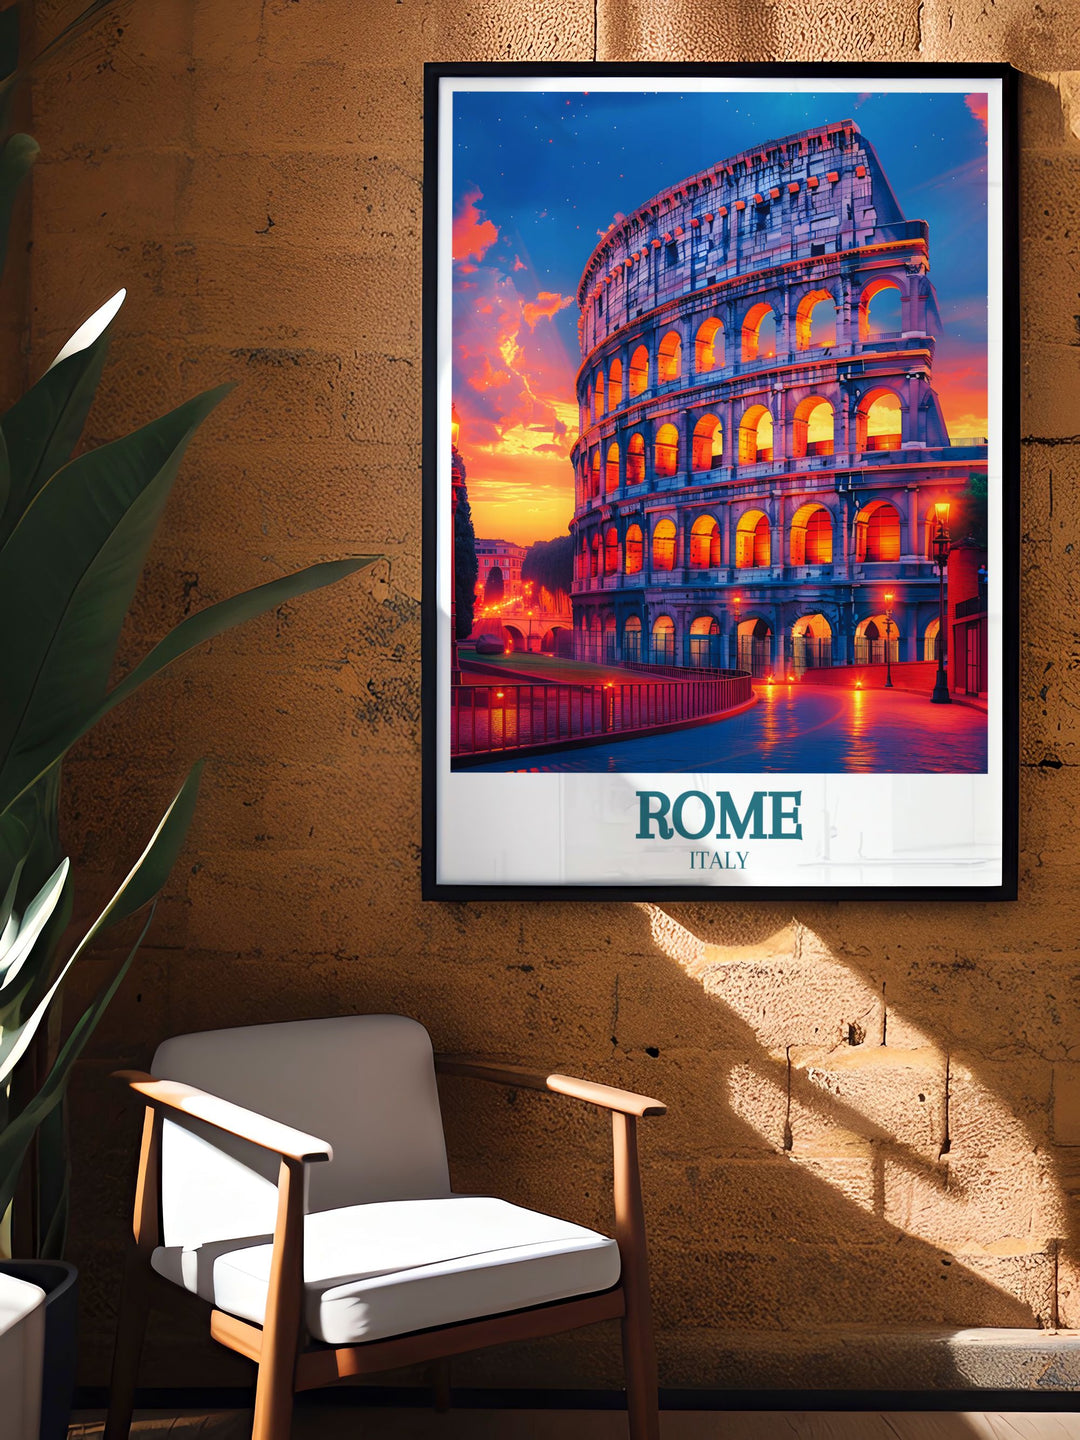 Charming Rome street map art print showcasing the Colosseum and Vatican City in a sophisticated black and white design ideal for enhancing your home decor or giving as a memorable gift for anniversaries birthdays or Christmas.